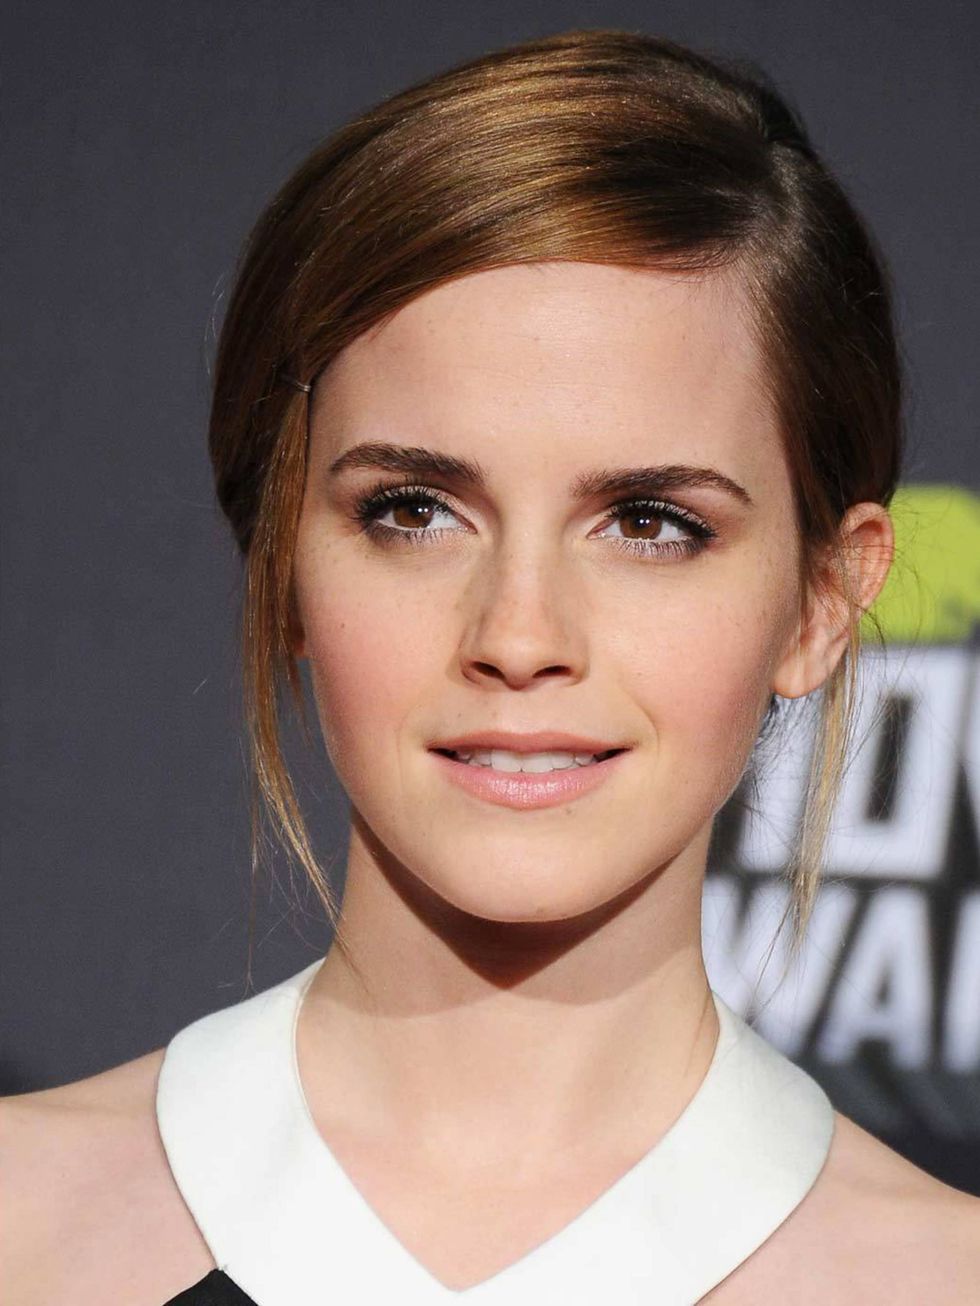 <p><a href="http://www.elleuk.com/star-style/celebrity-style-files/emma-watson">Emma Watson,</a> who took home the award for Trailblazer, opted for pretty, classic make-up  employing some expert tricks along the way like applying white eyeliner in her wa